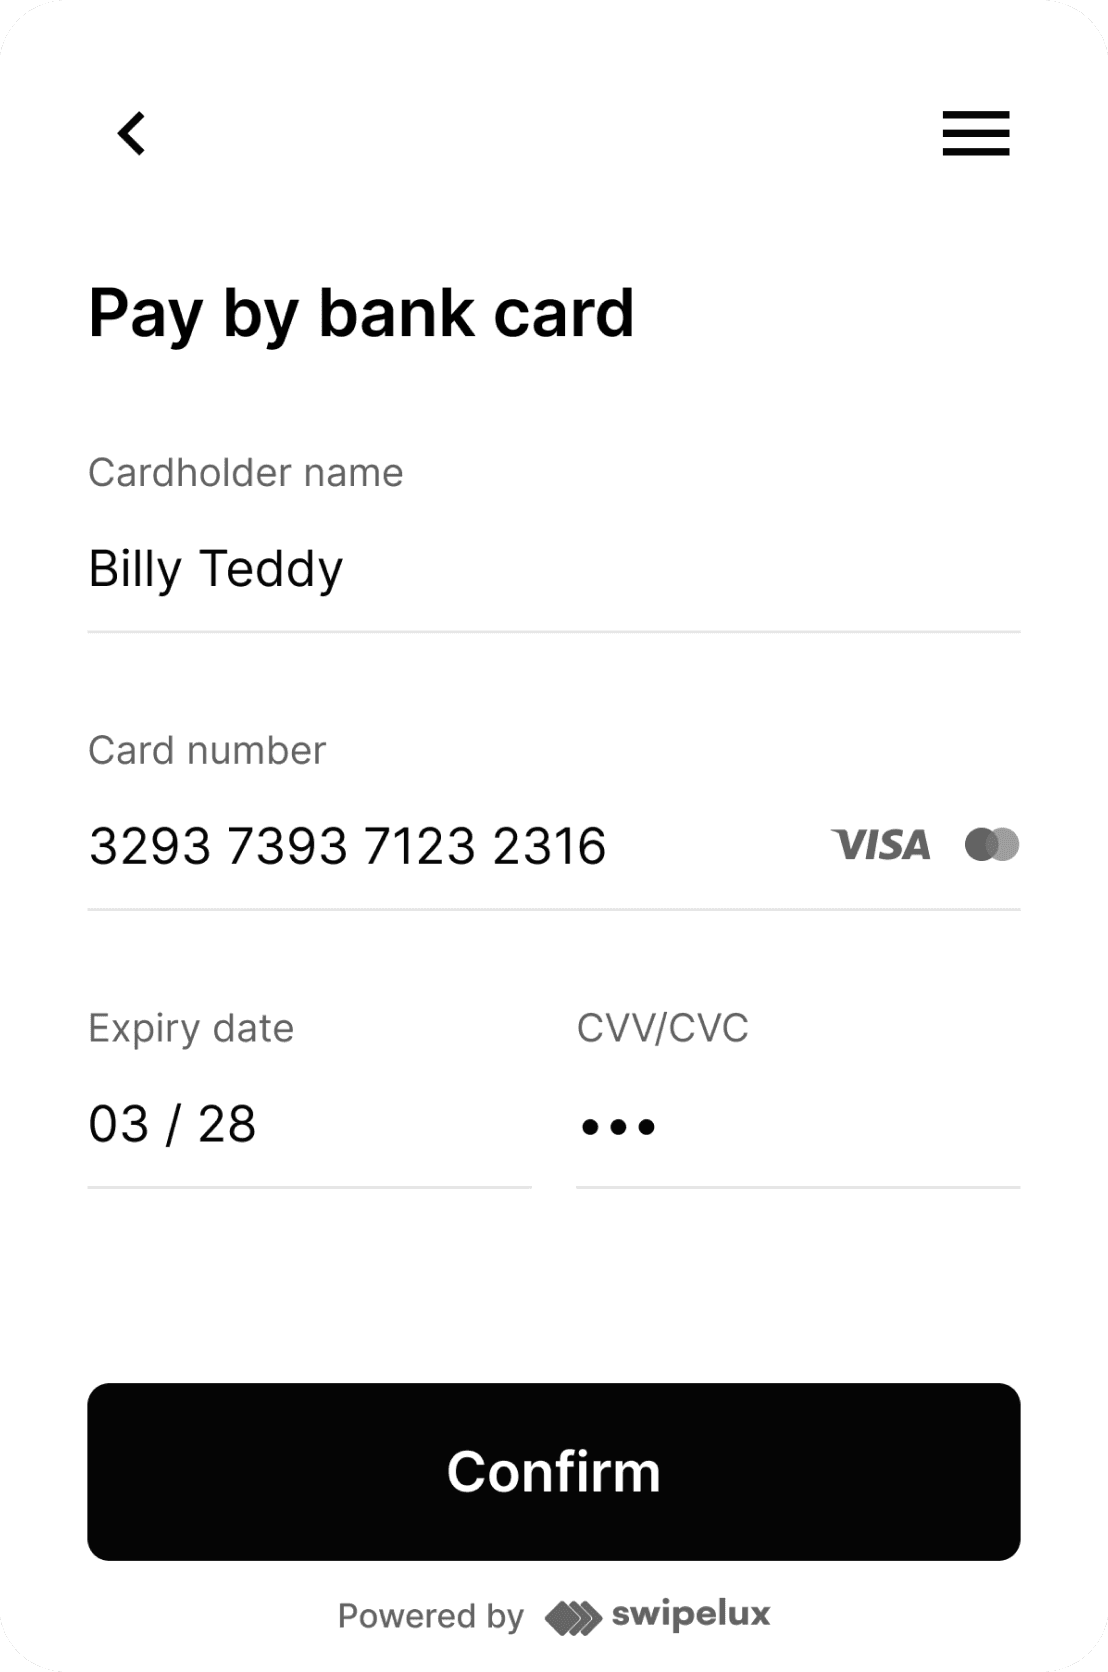 you can use bank cards for pay